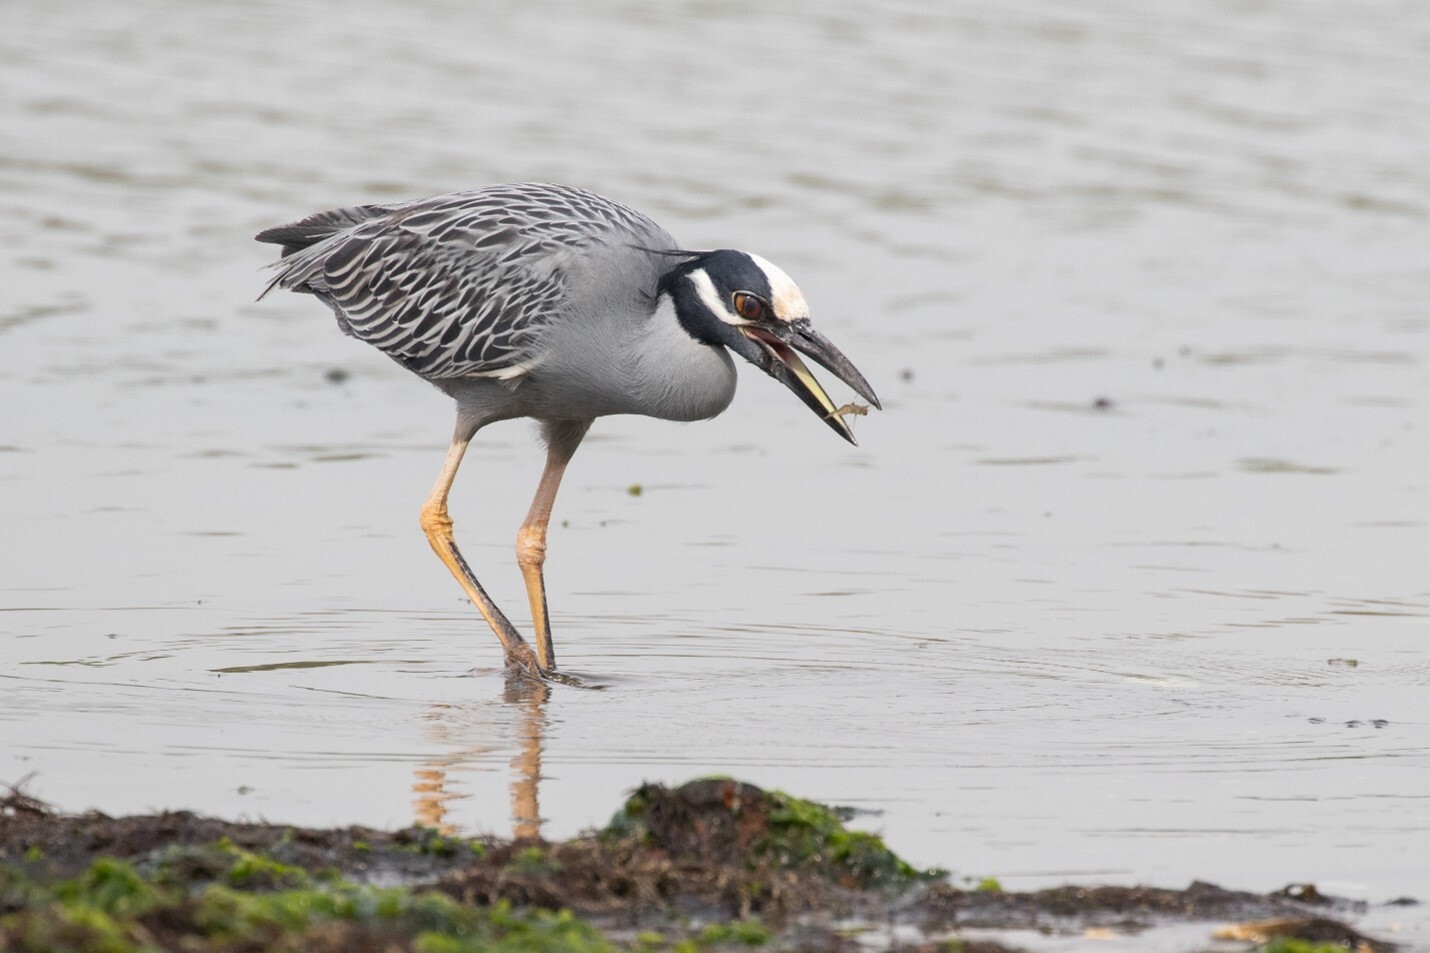 This adult Yellow-crowned Night-Heron, photographed in Brooklyn in May 2021, likely nests in or around Jamaica Bay. This species, which feeds on crustaceans taken from tidal creeks, mostly nests in residential neighborhoods. Photo: Ryan Mandelbaum